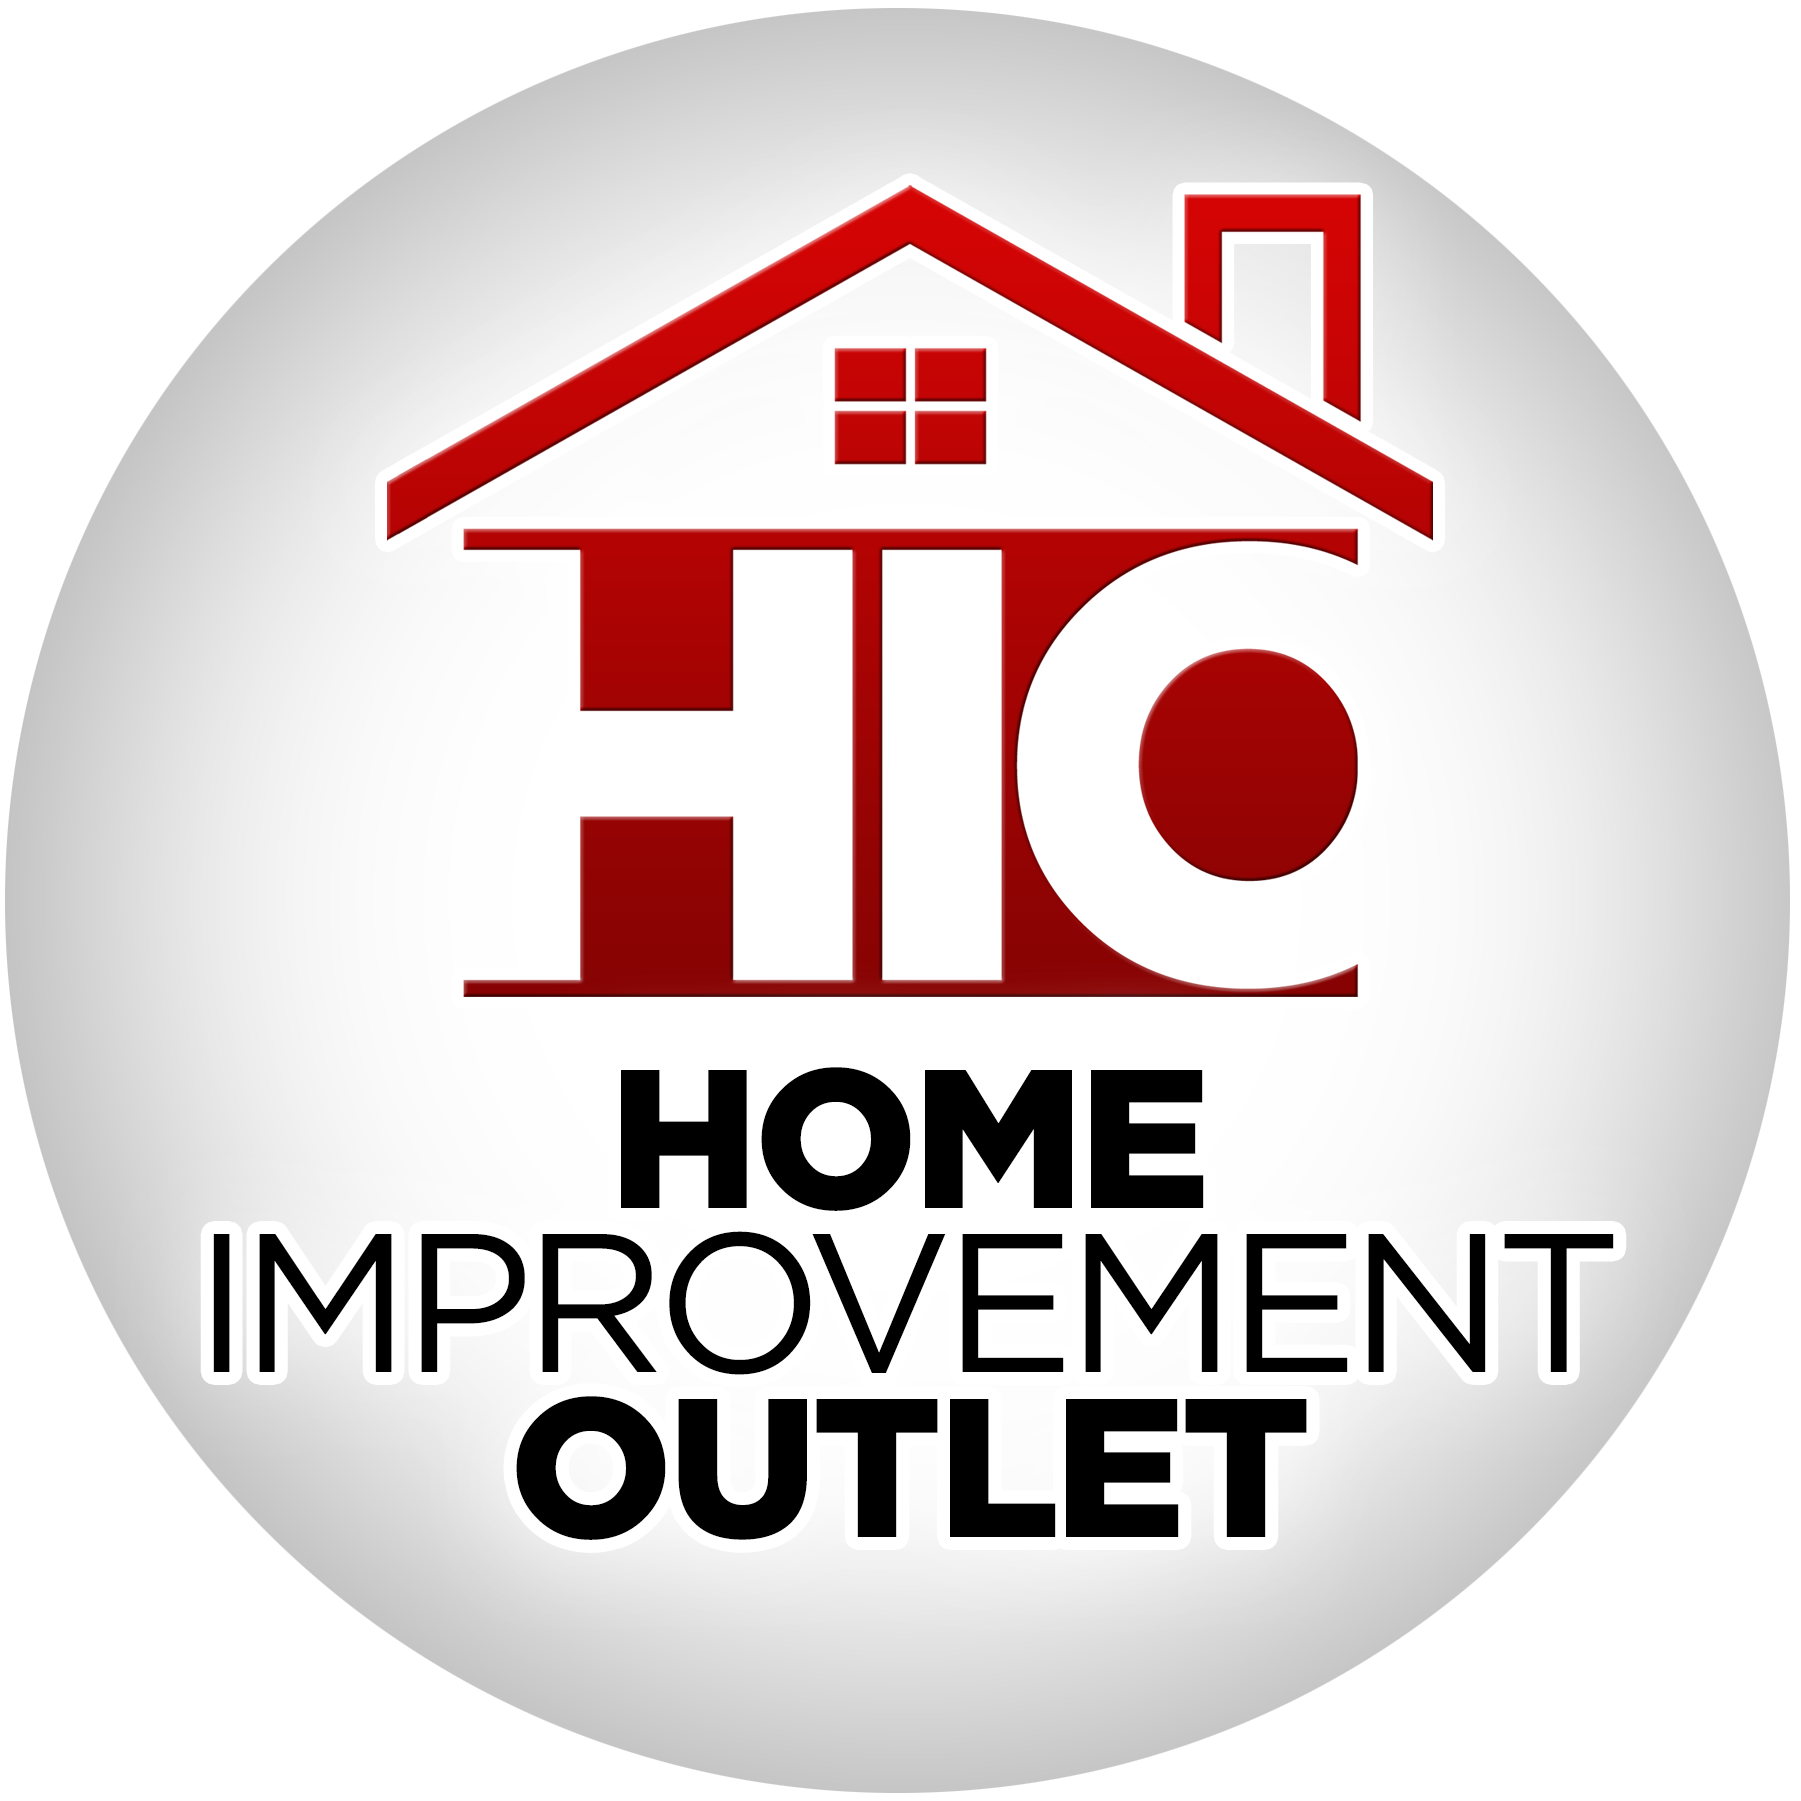 Home Improvement Outlet Columbia: Your Destination for Quality Products at Affordable Prices